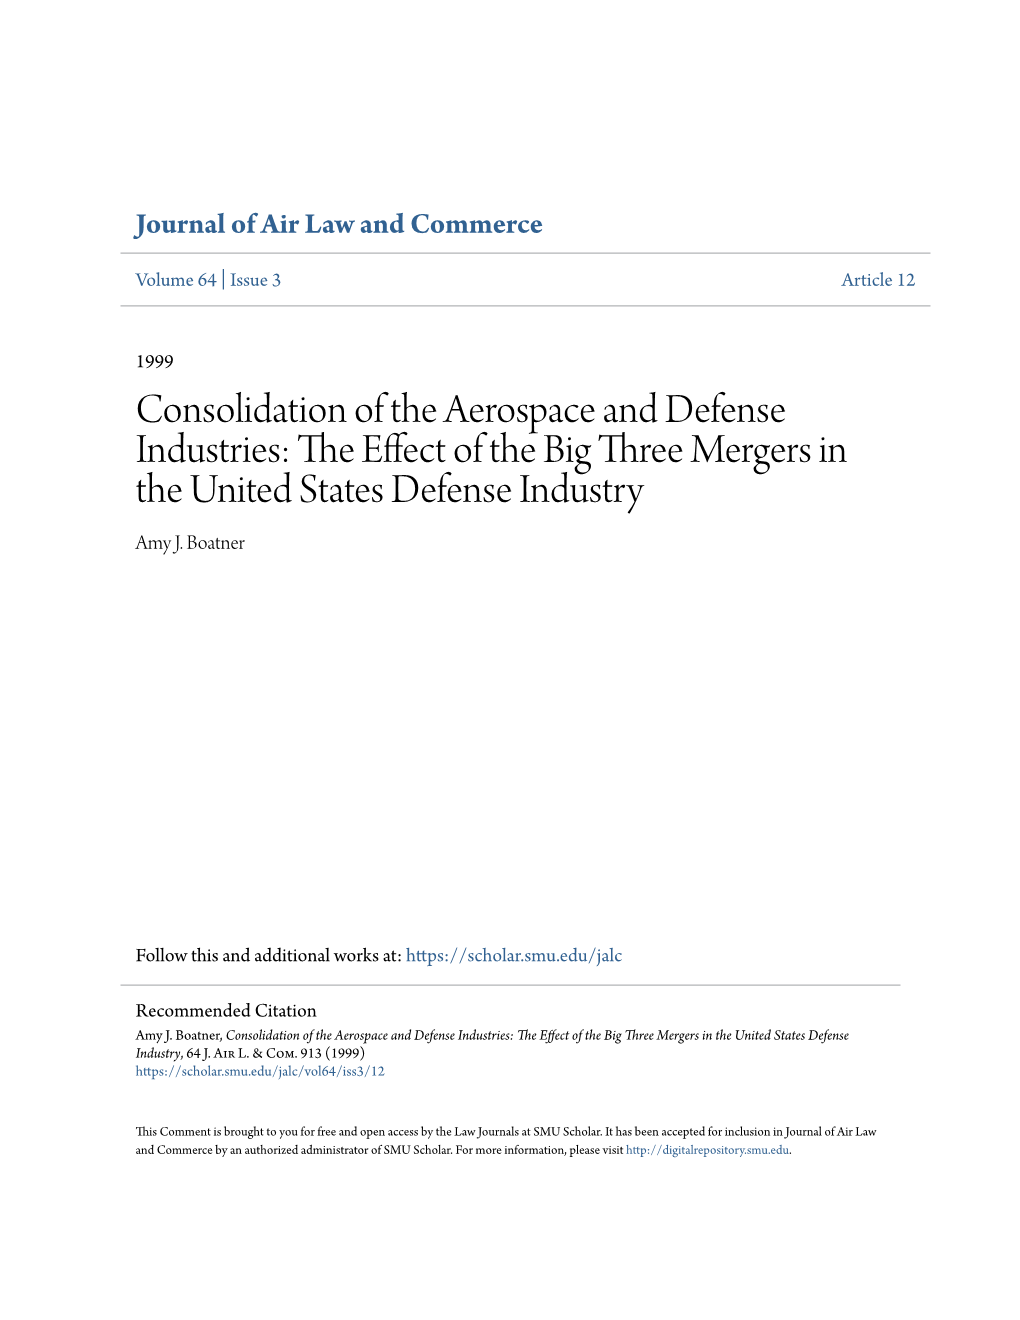 Consolidation of the Aerospace and Defense Industries: the Ffece T of the Big Three Mergers in the United States Defense Industry Amy J